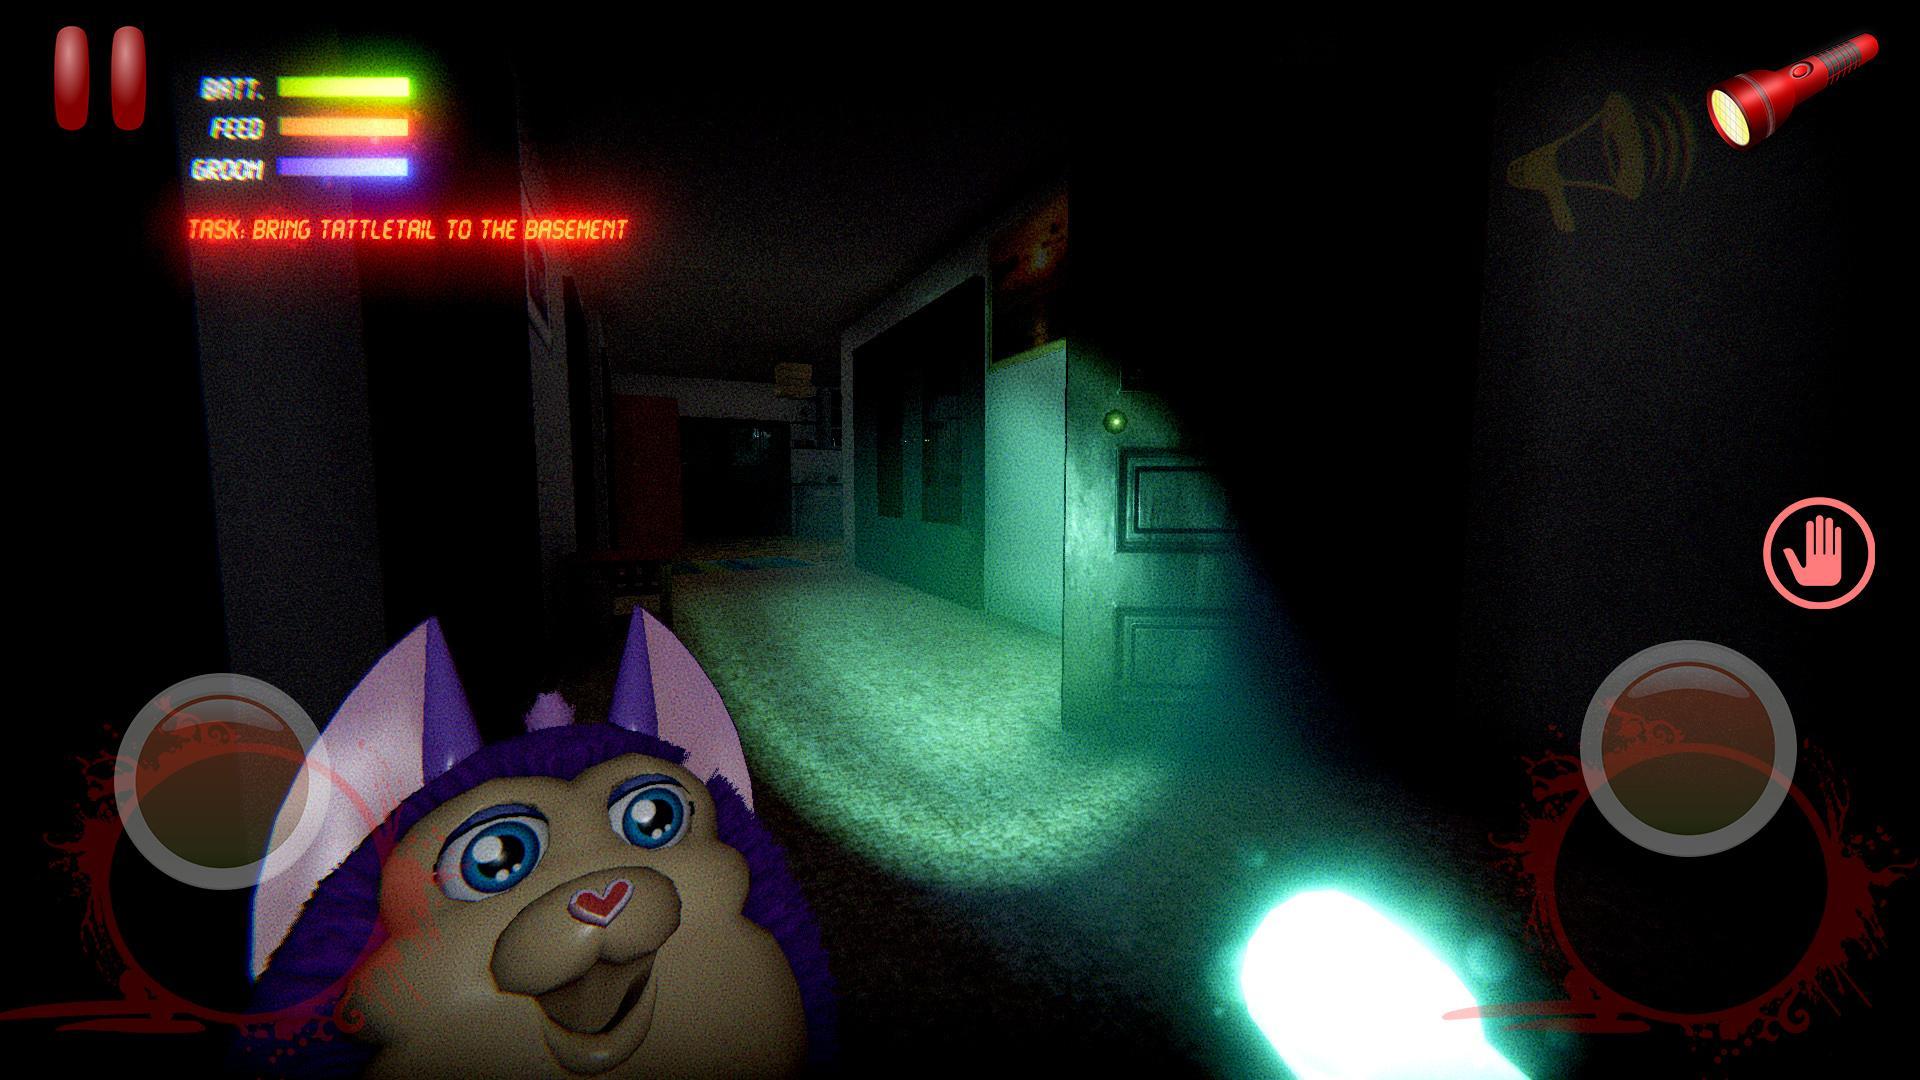 tattletail game APK (Android Game) - Free Download